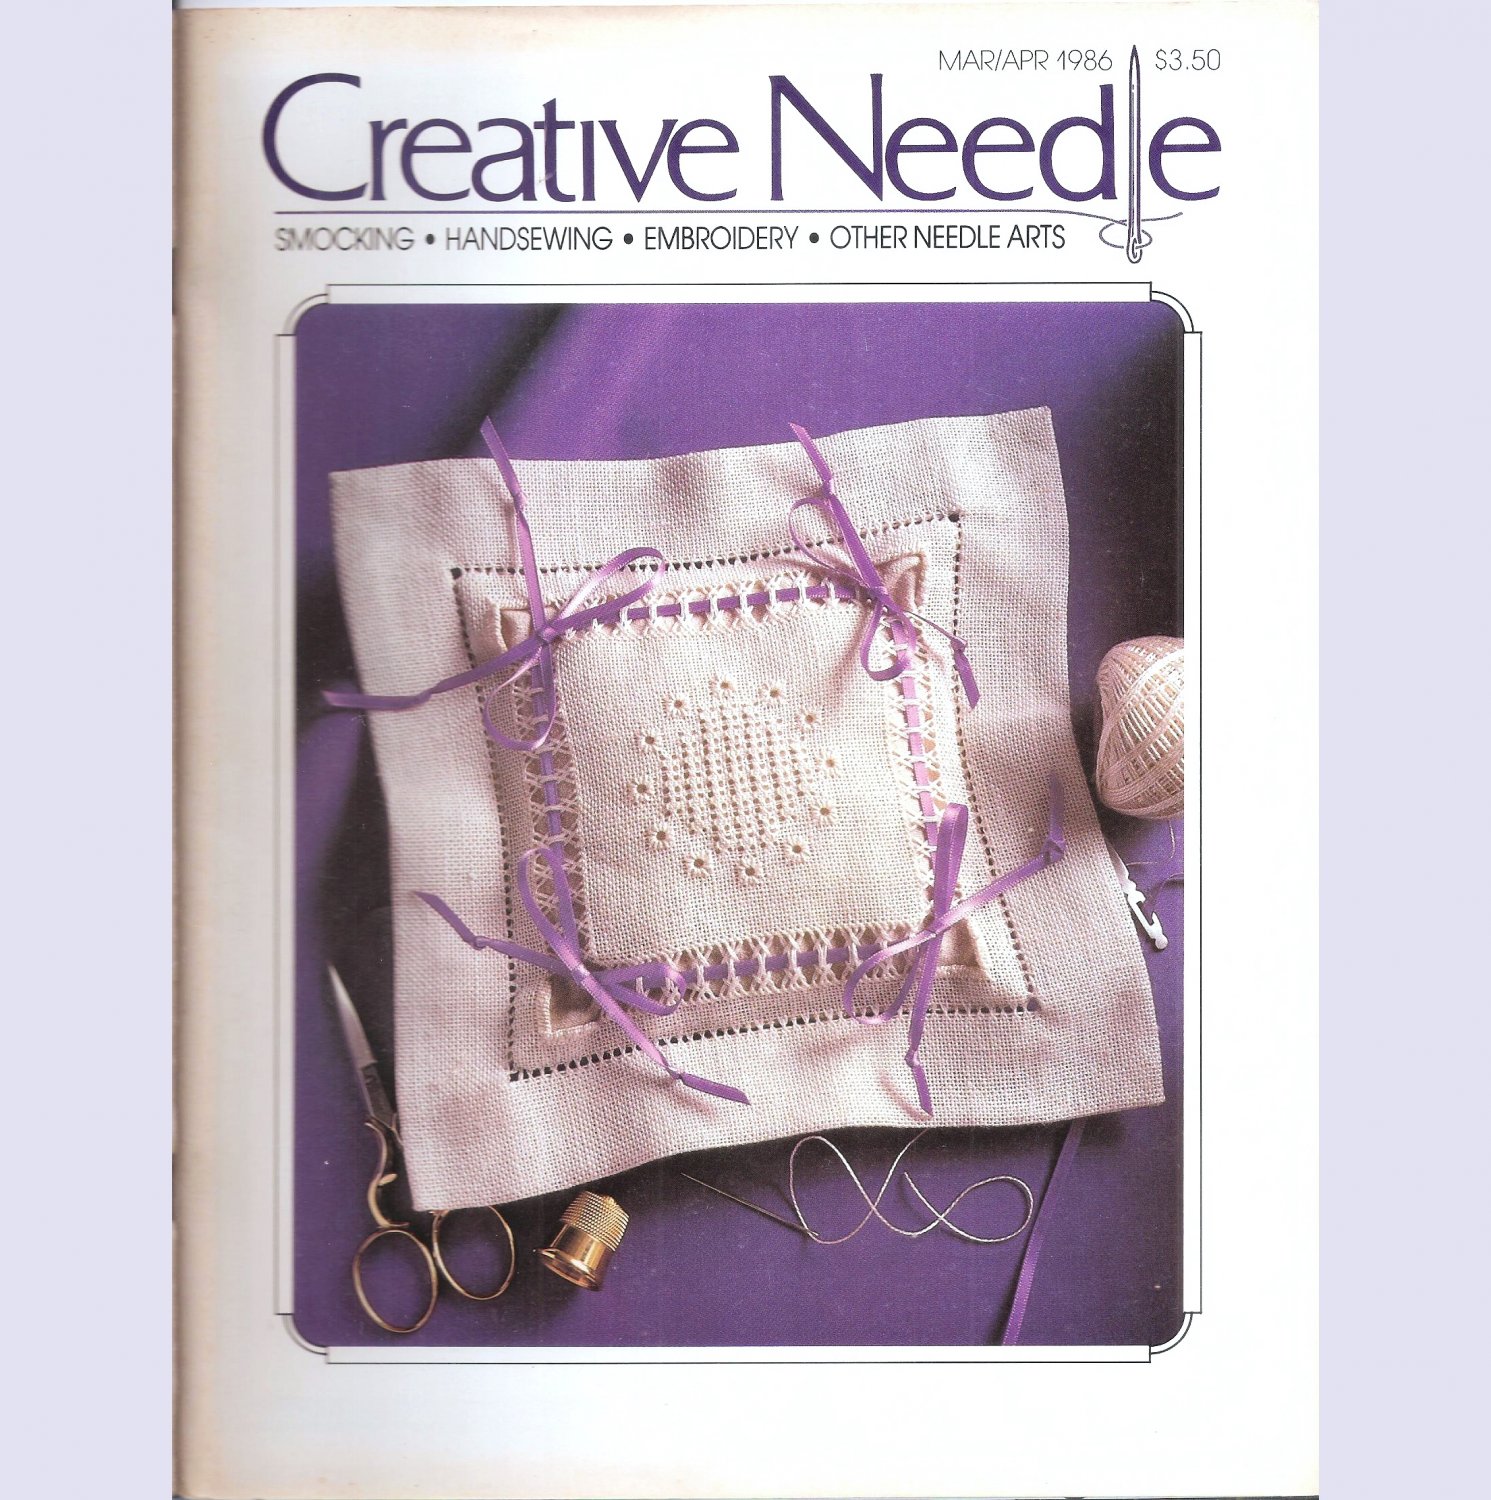 Creative Needle Magazine - March / April 1986 - Volume Two, Number Two